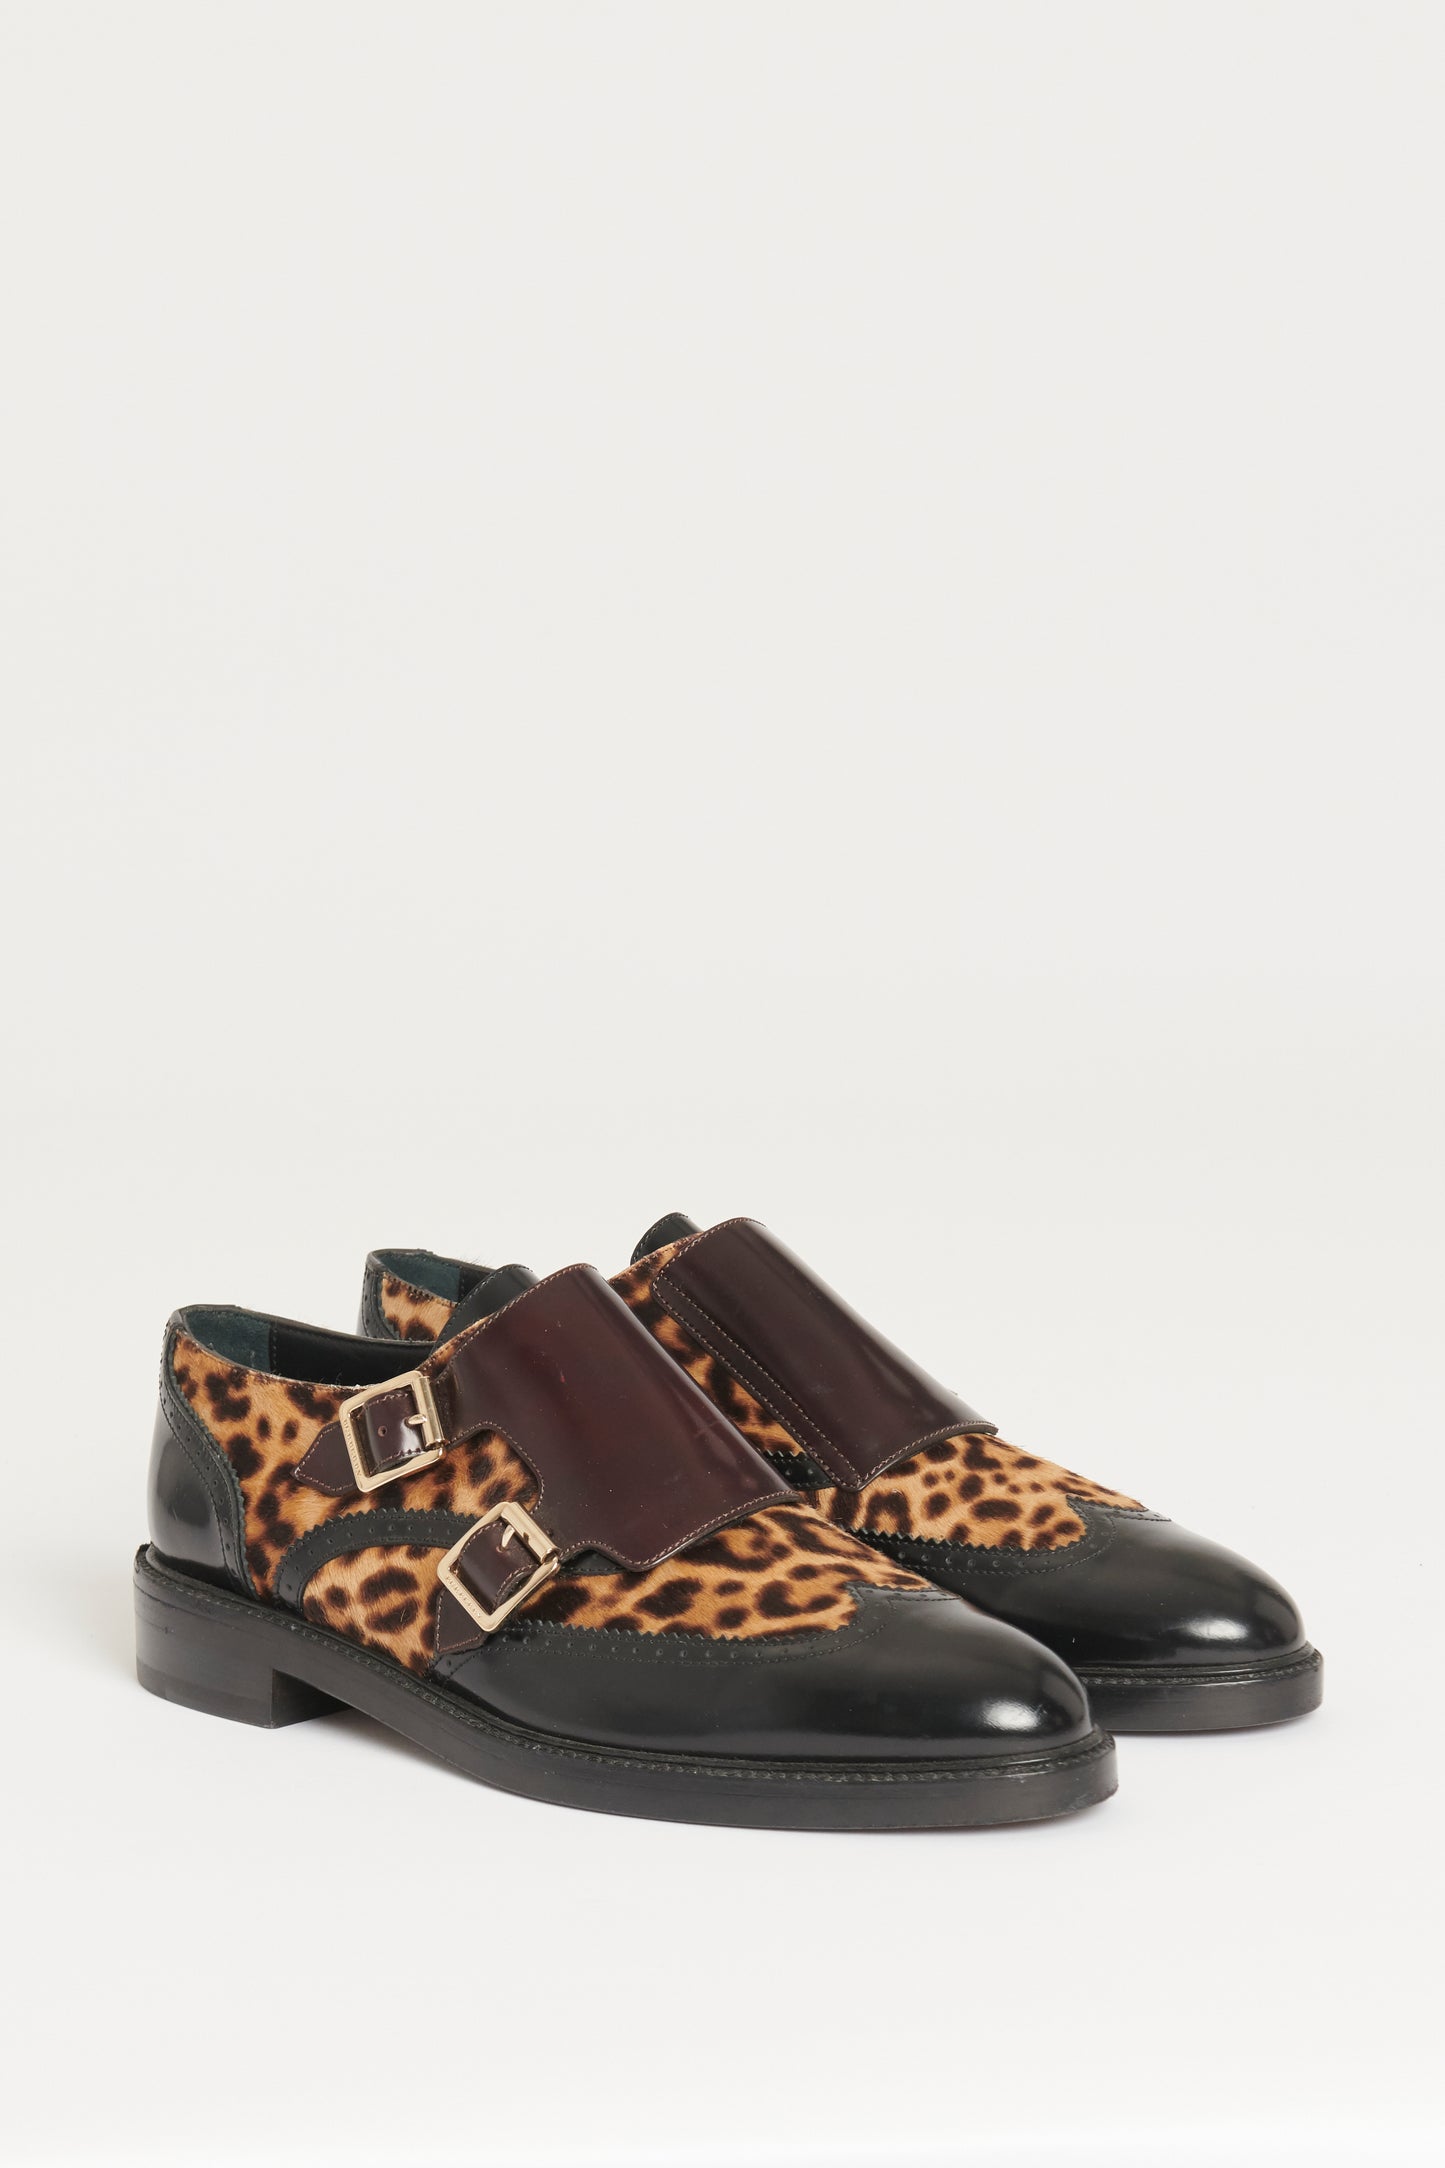 Brown/Beige Leather 'Sunningford' Leopard Print Loafers